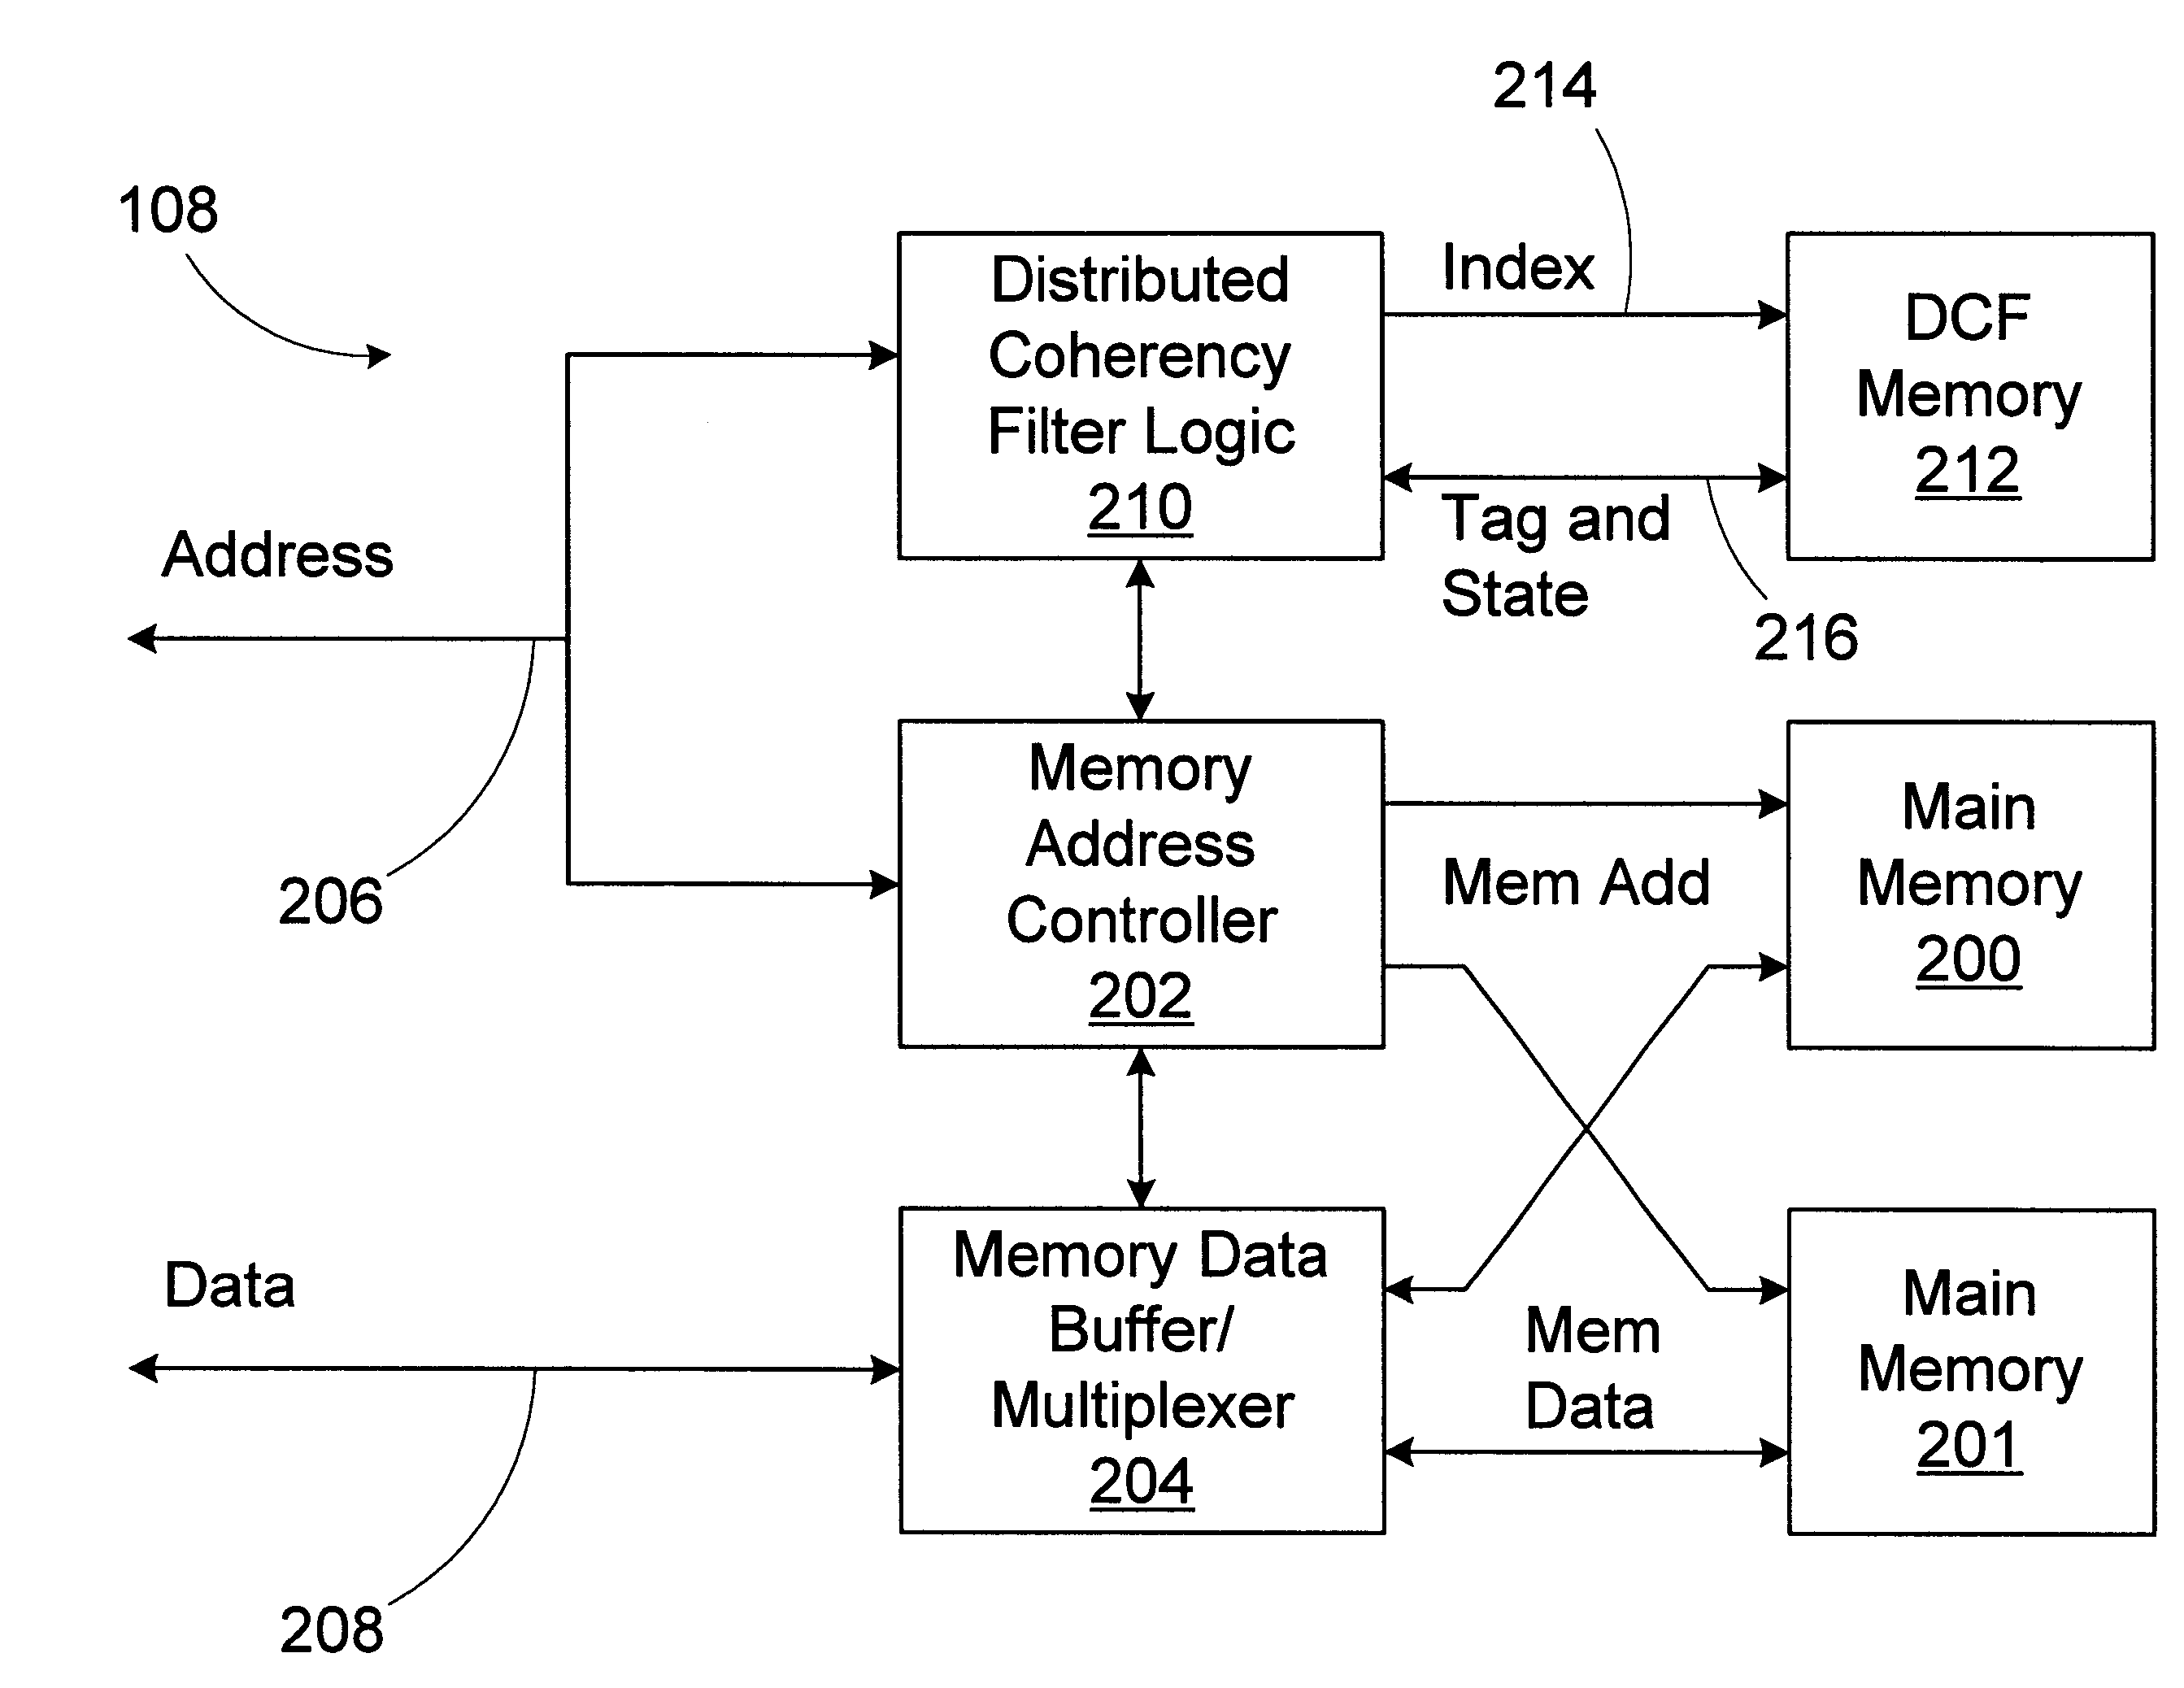 Method and apparatus for maintaining cache coherency in a computer system having multiple processor buses